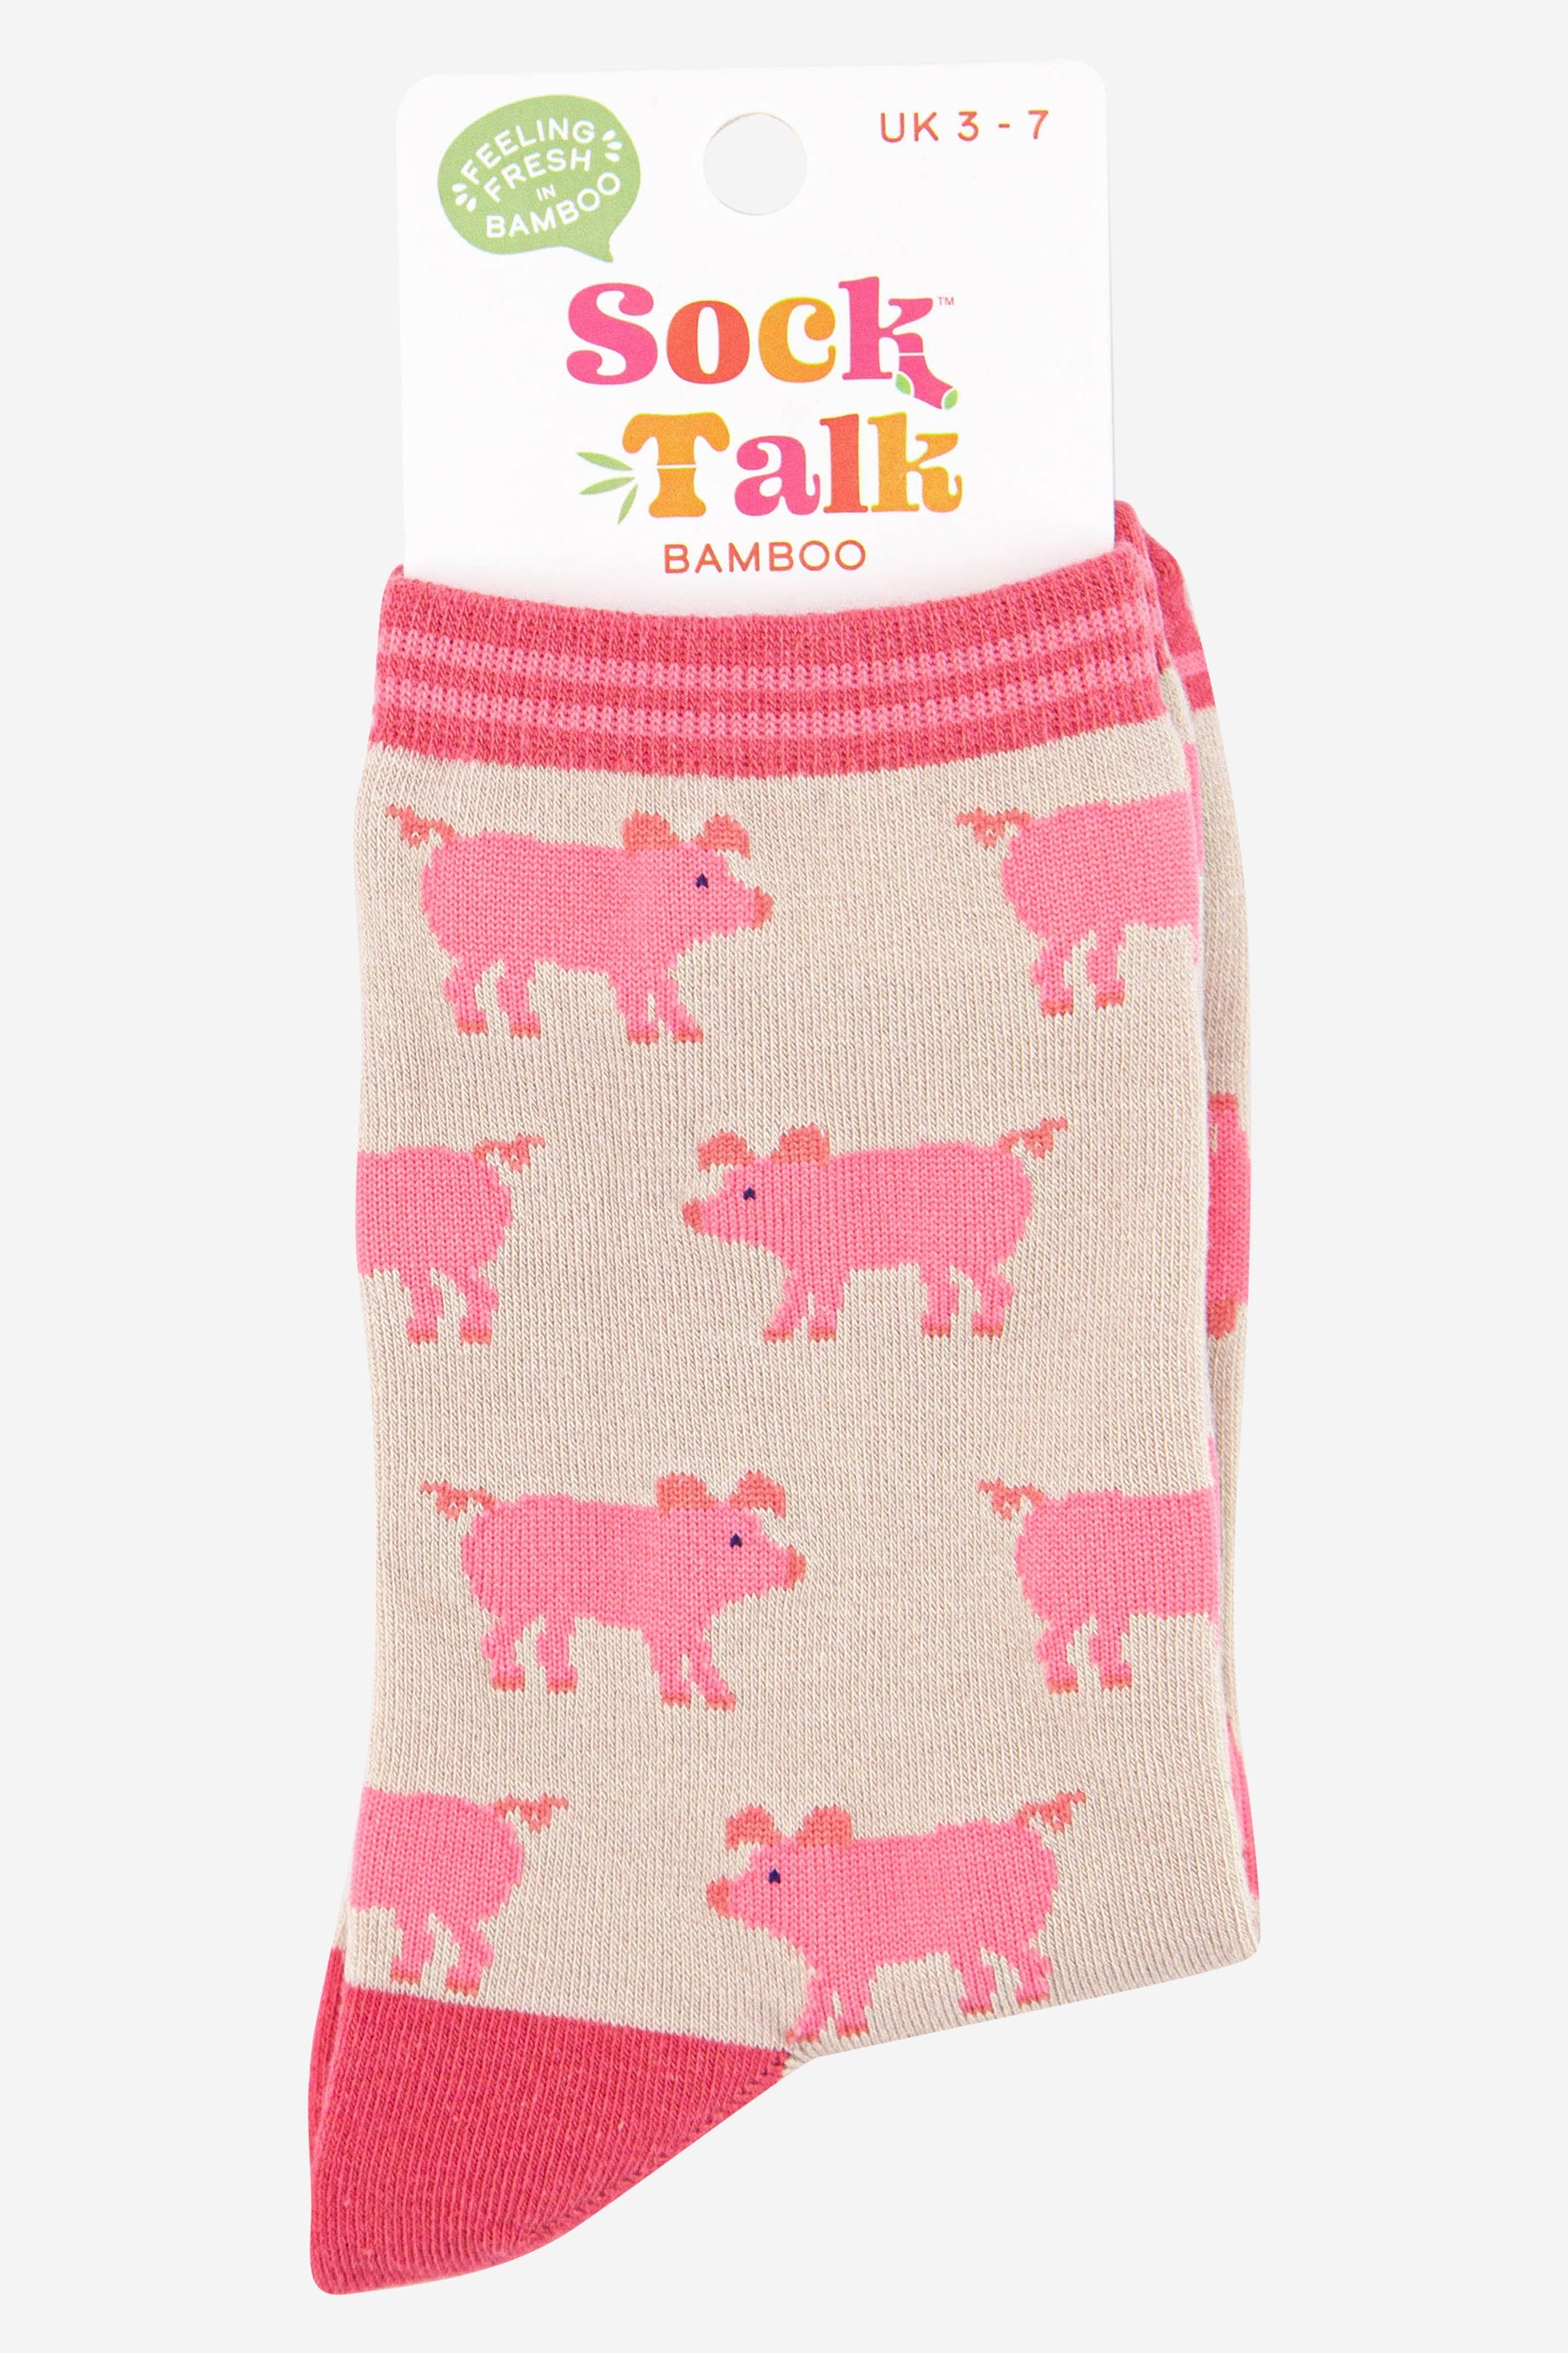 womens pink pig ankle socks uk size 3-7